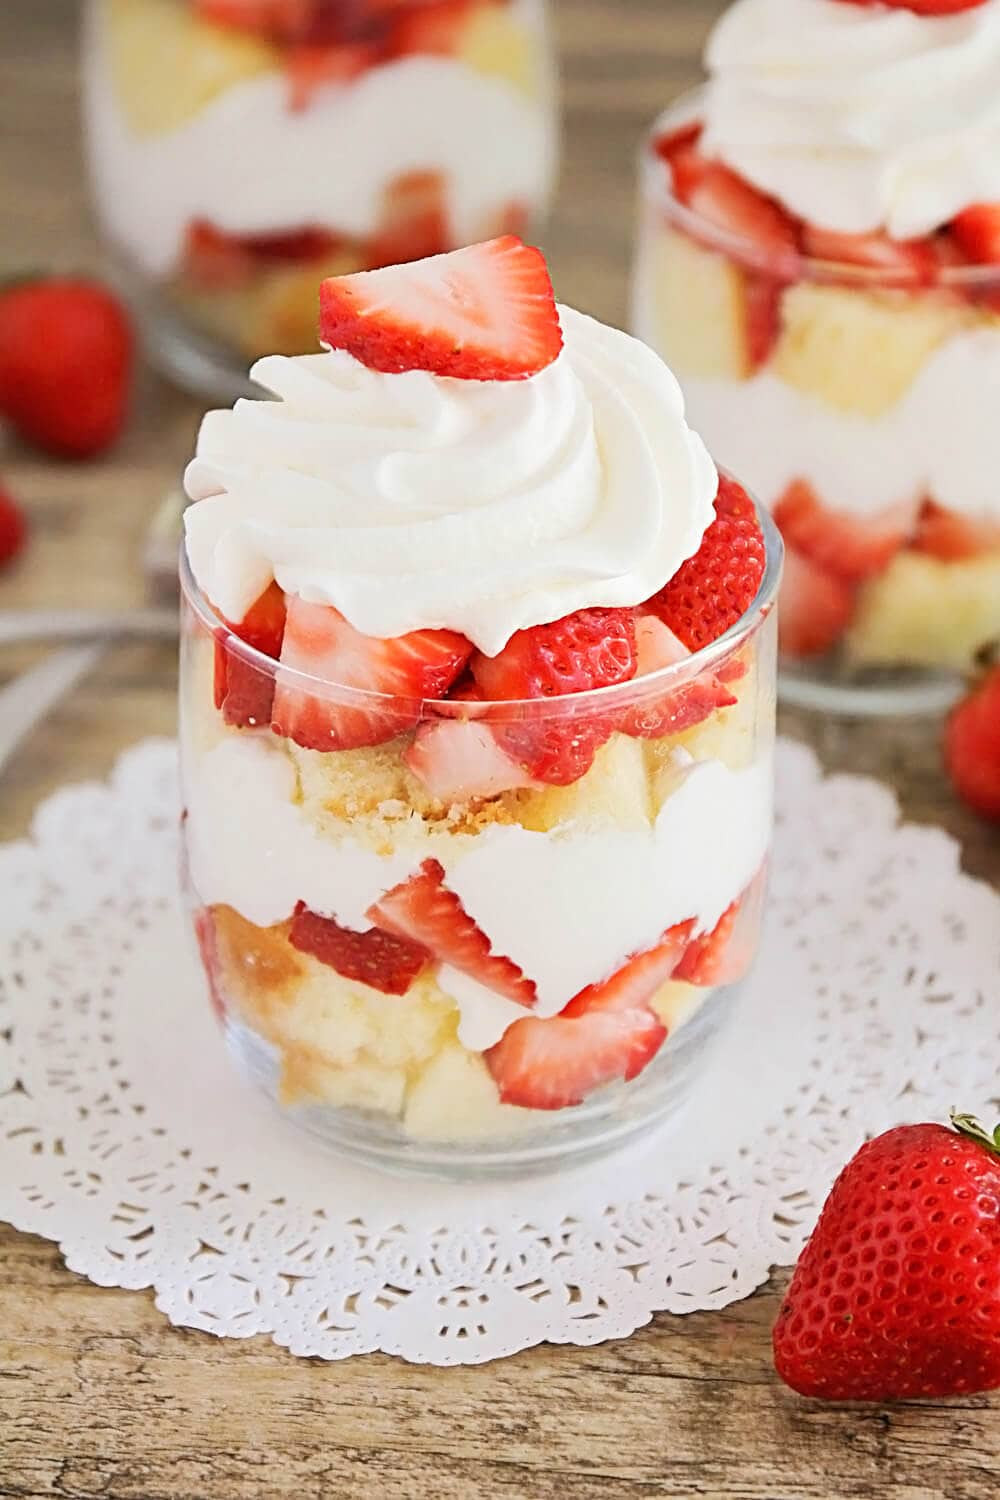 Simple Strawberry Desserts
 EASY Strawberry Shortcake Trifle I Heart Nap Time